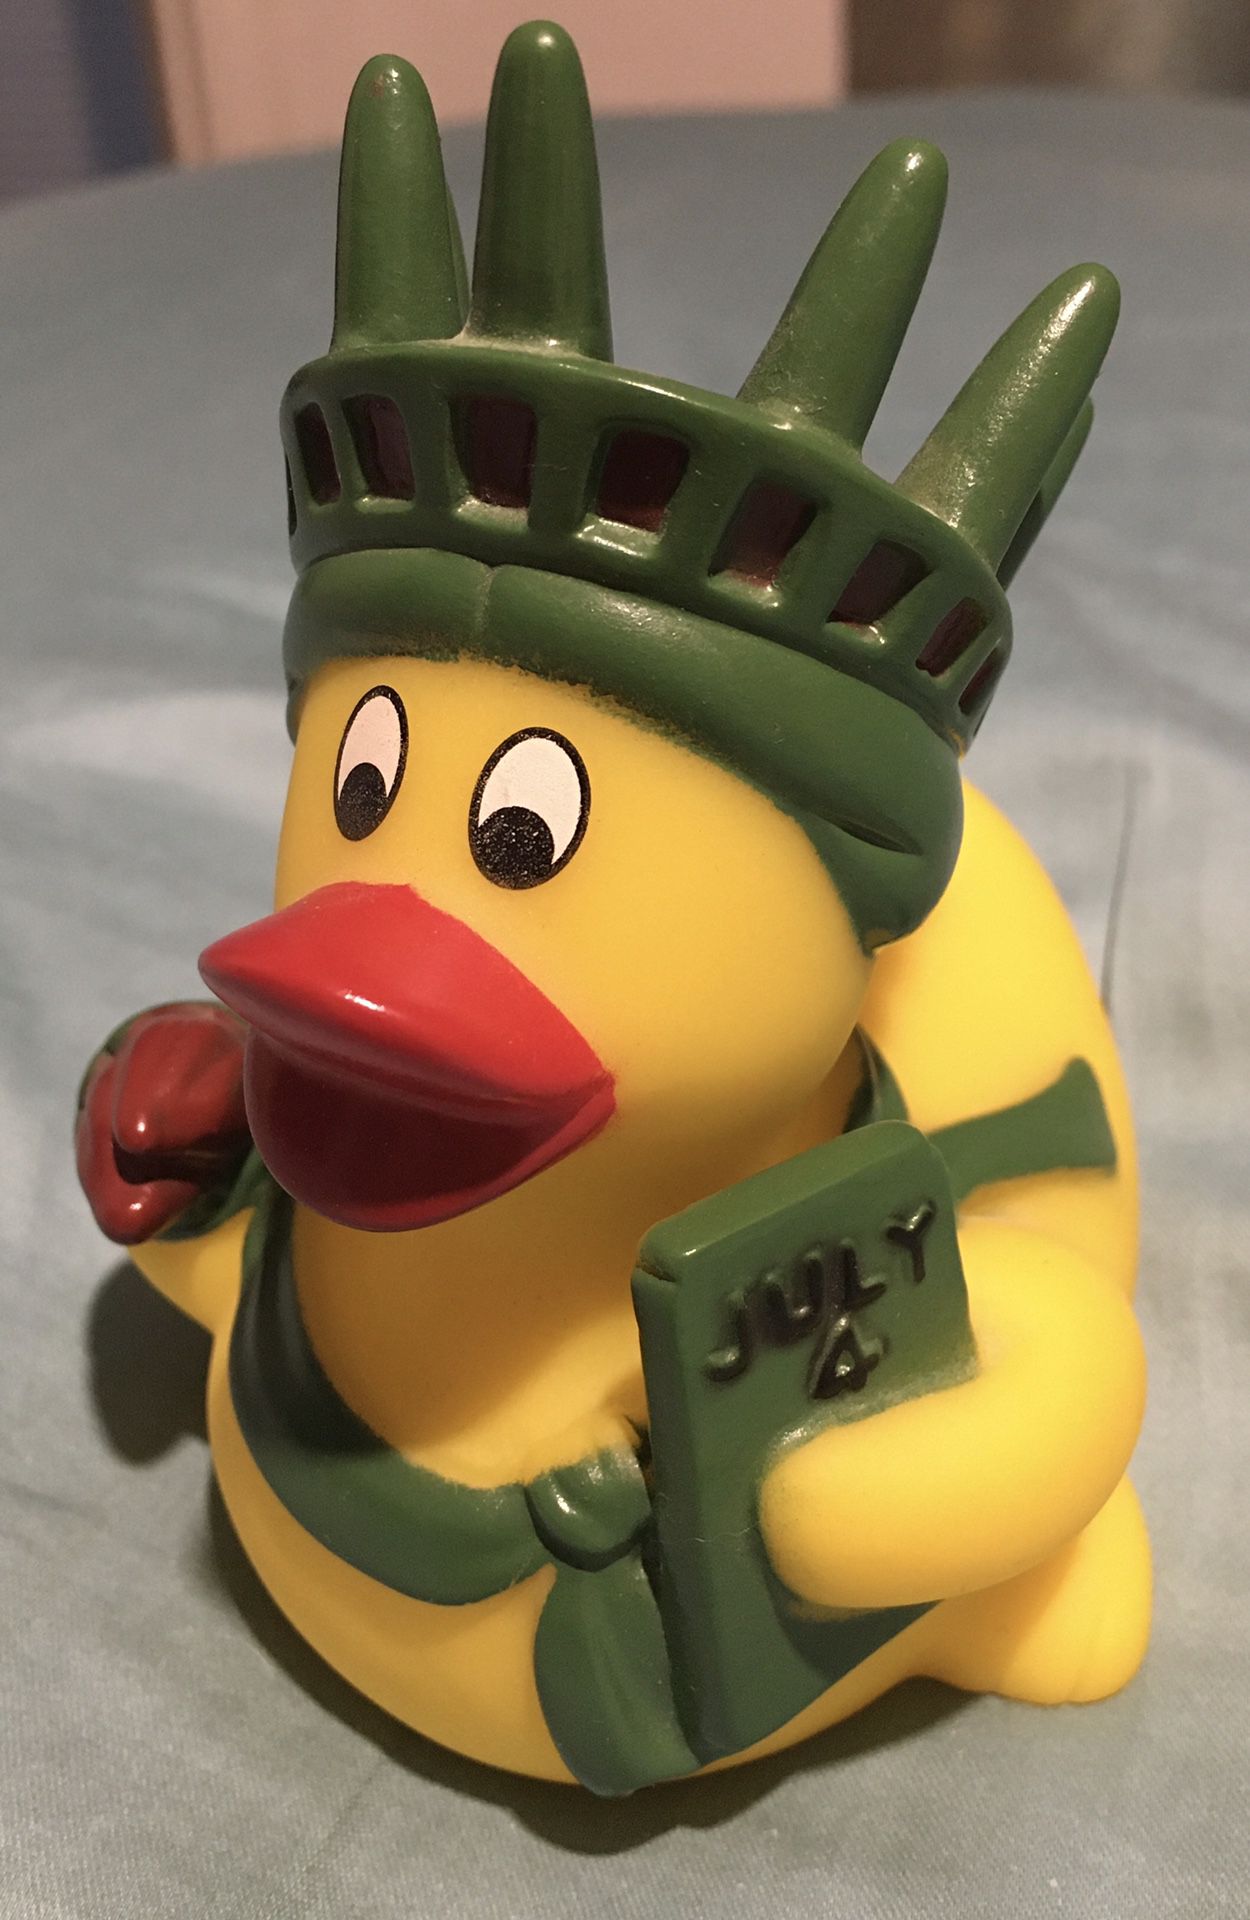 Collectible toy duck